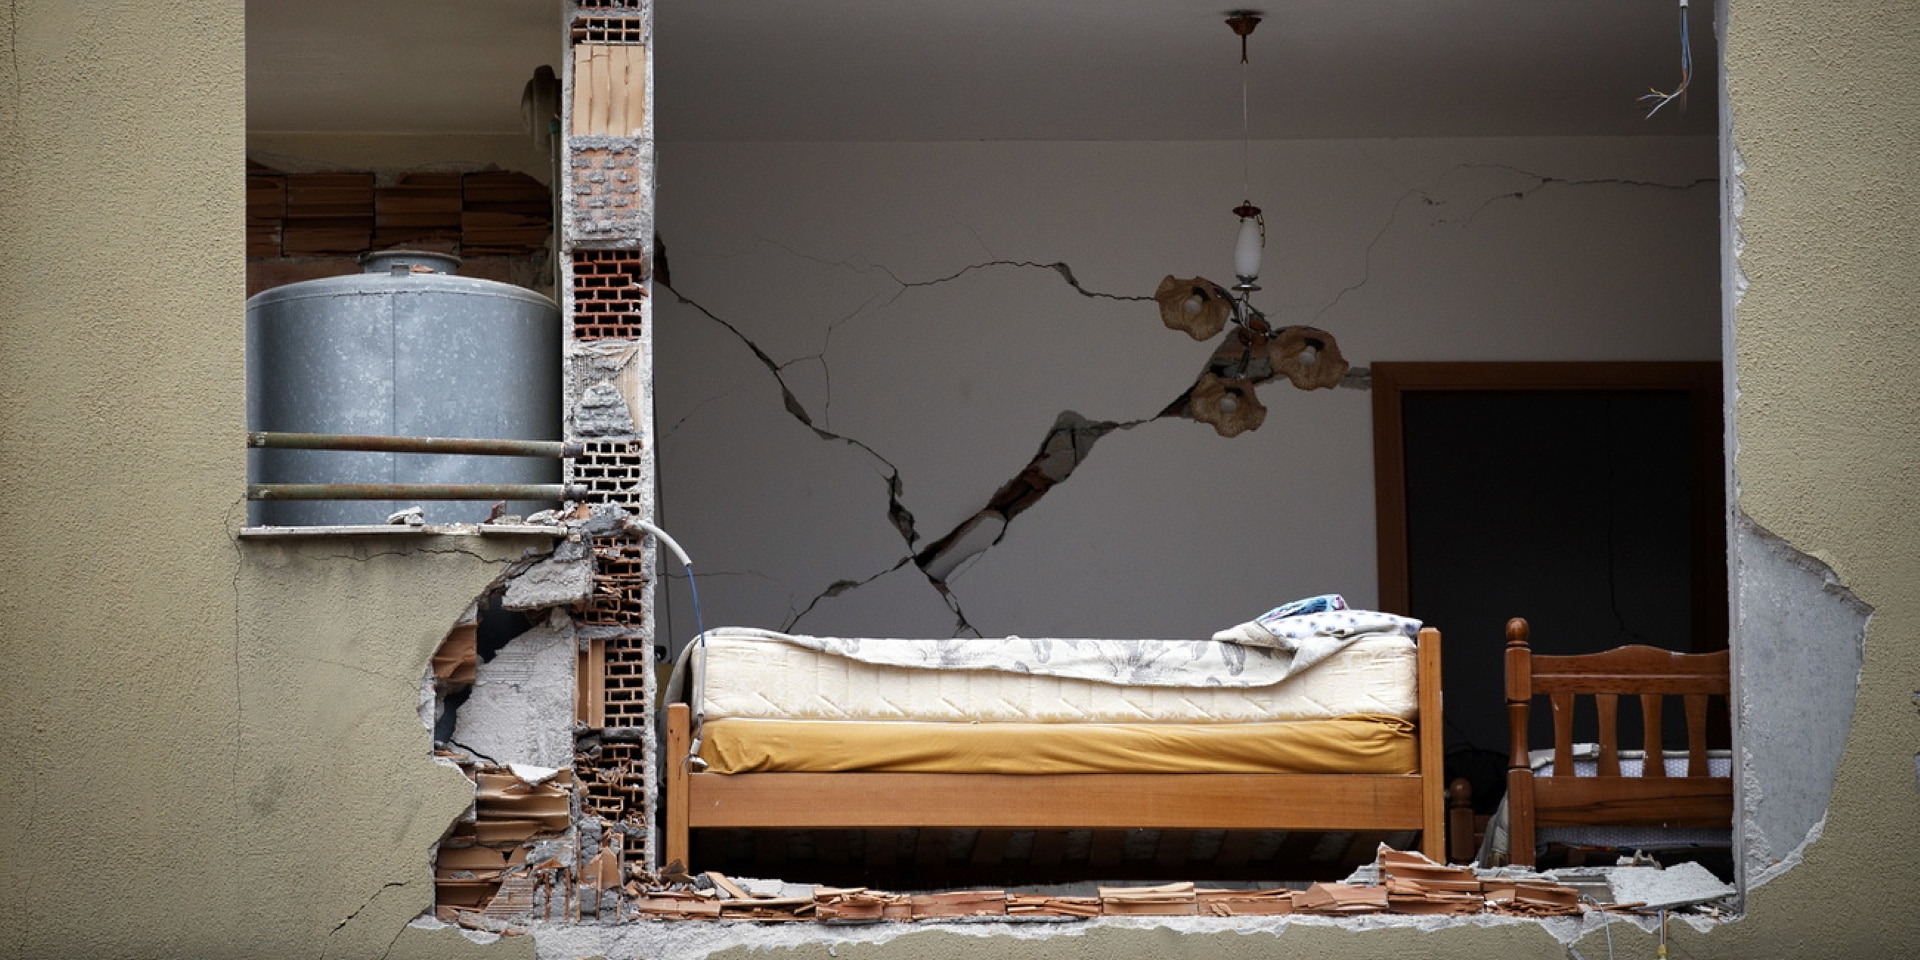 The earthquake tore open the front a building, where a bed is now visible.